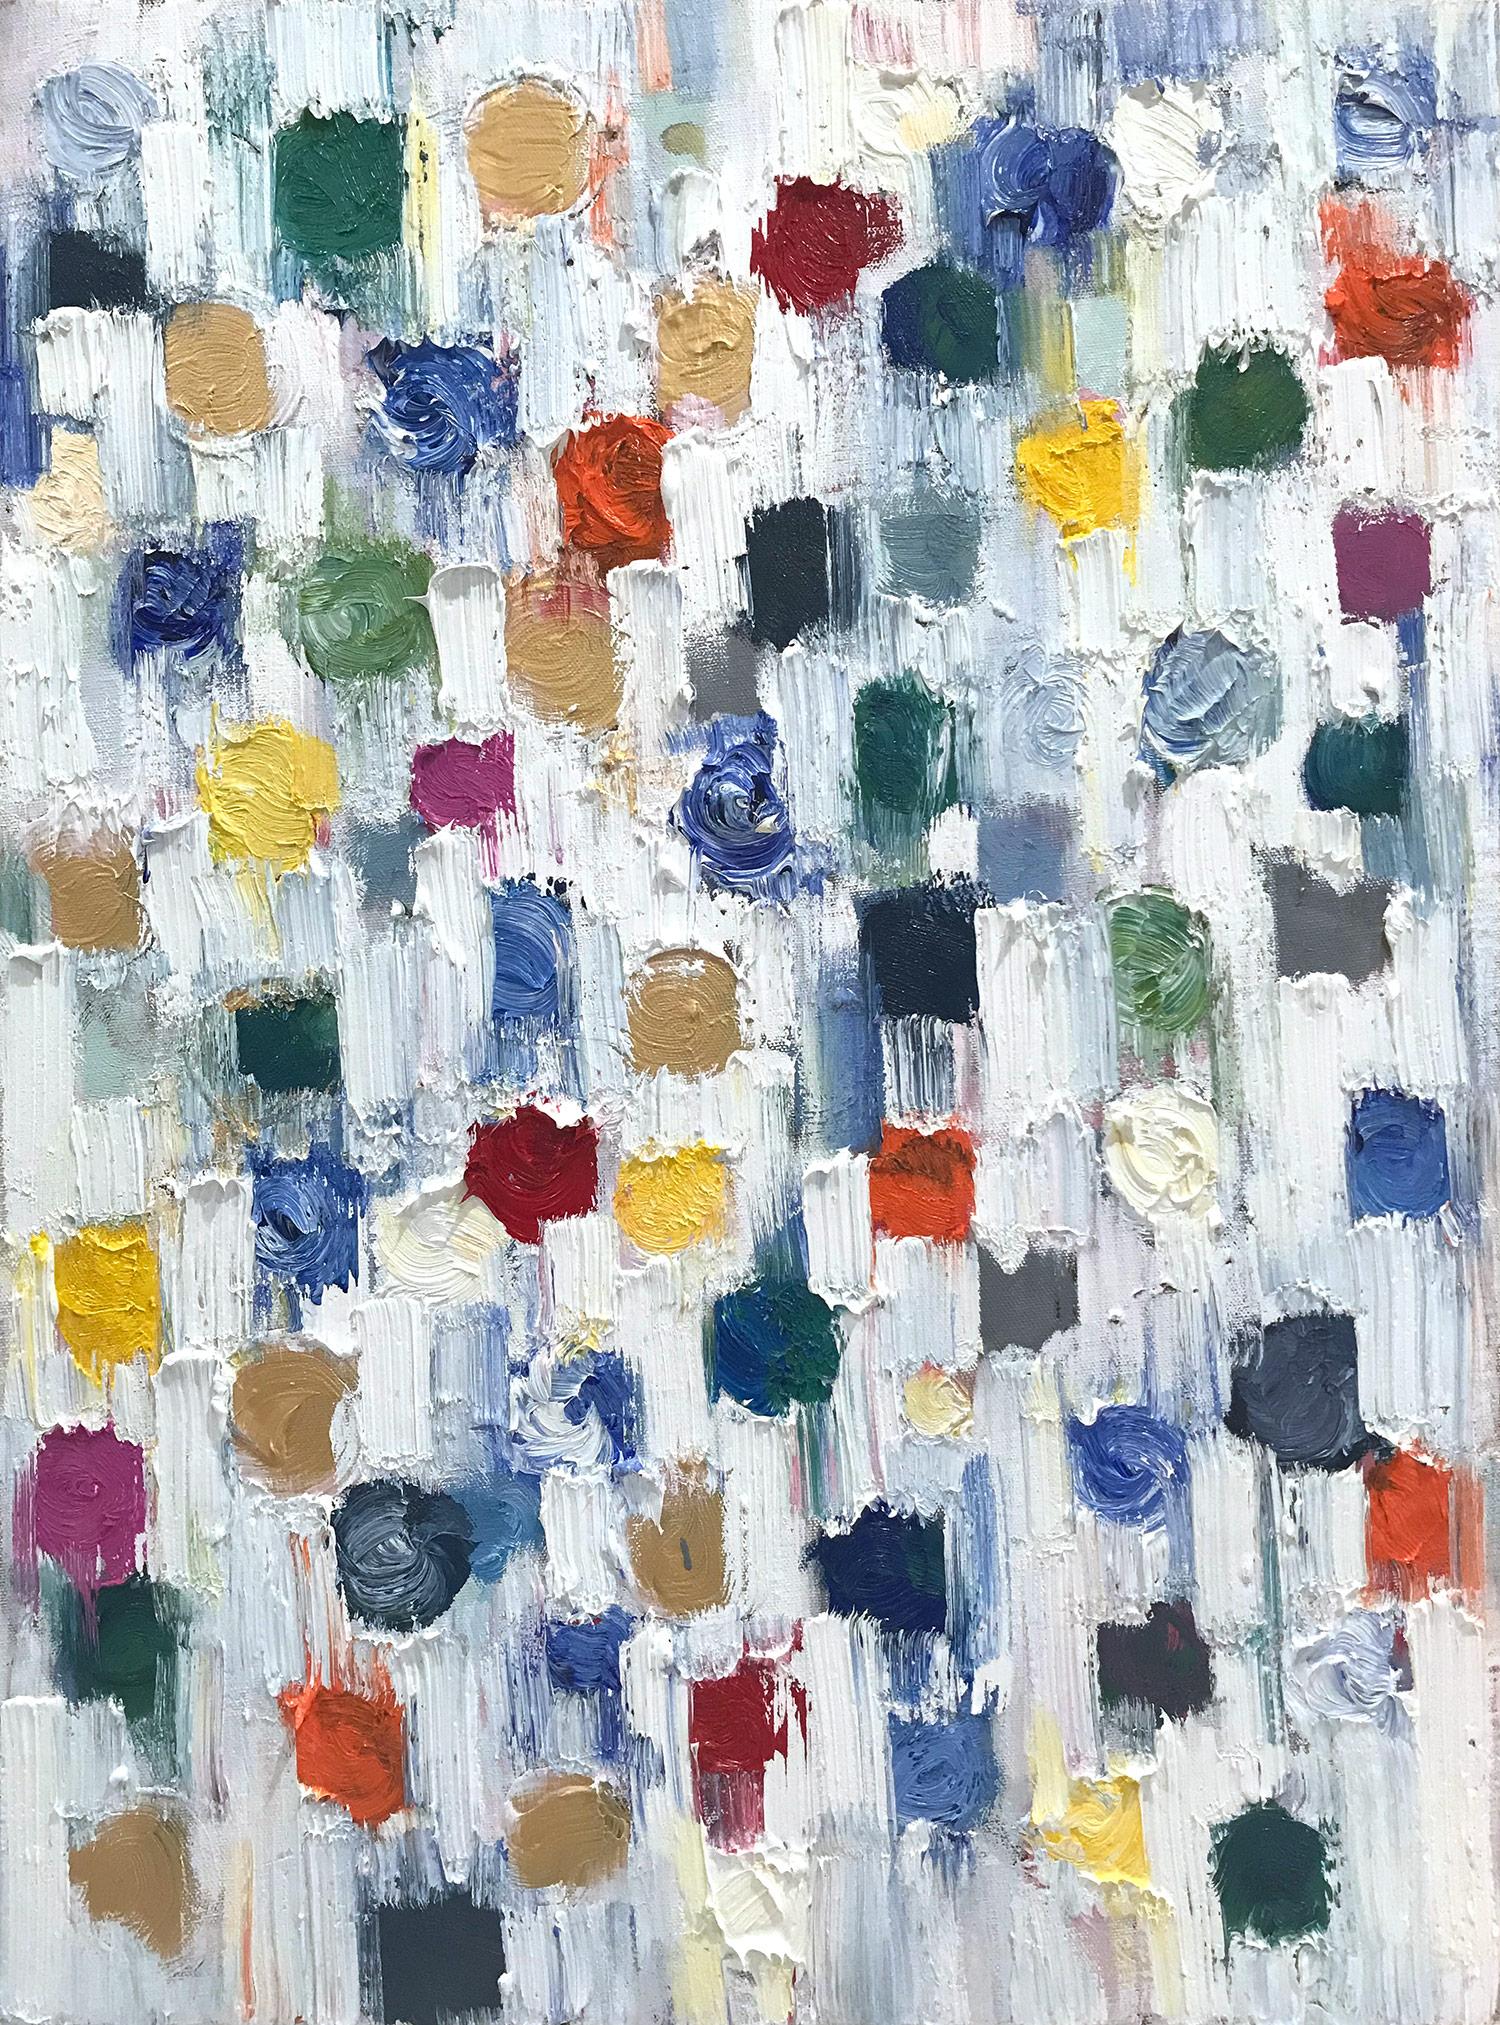 Cindy Shaoul Abstract Painting - "Dripping Dots - Capri" Colorful Abstract Oil Painting on Canvas